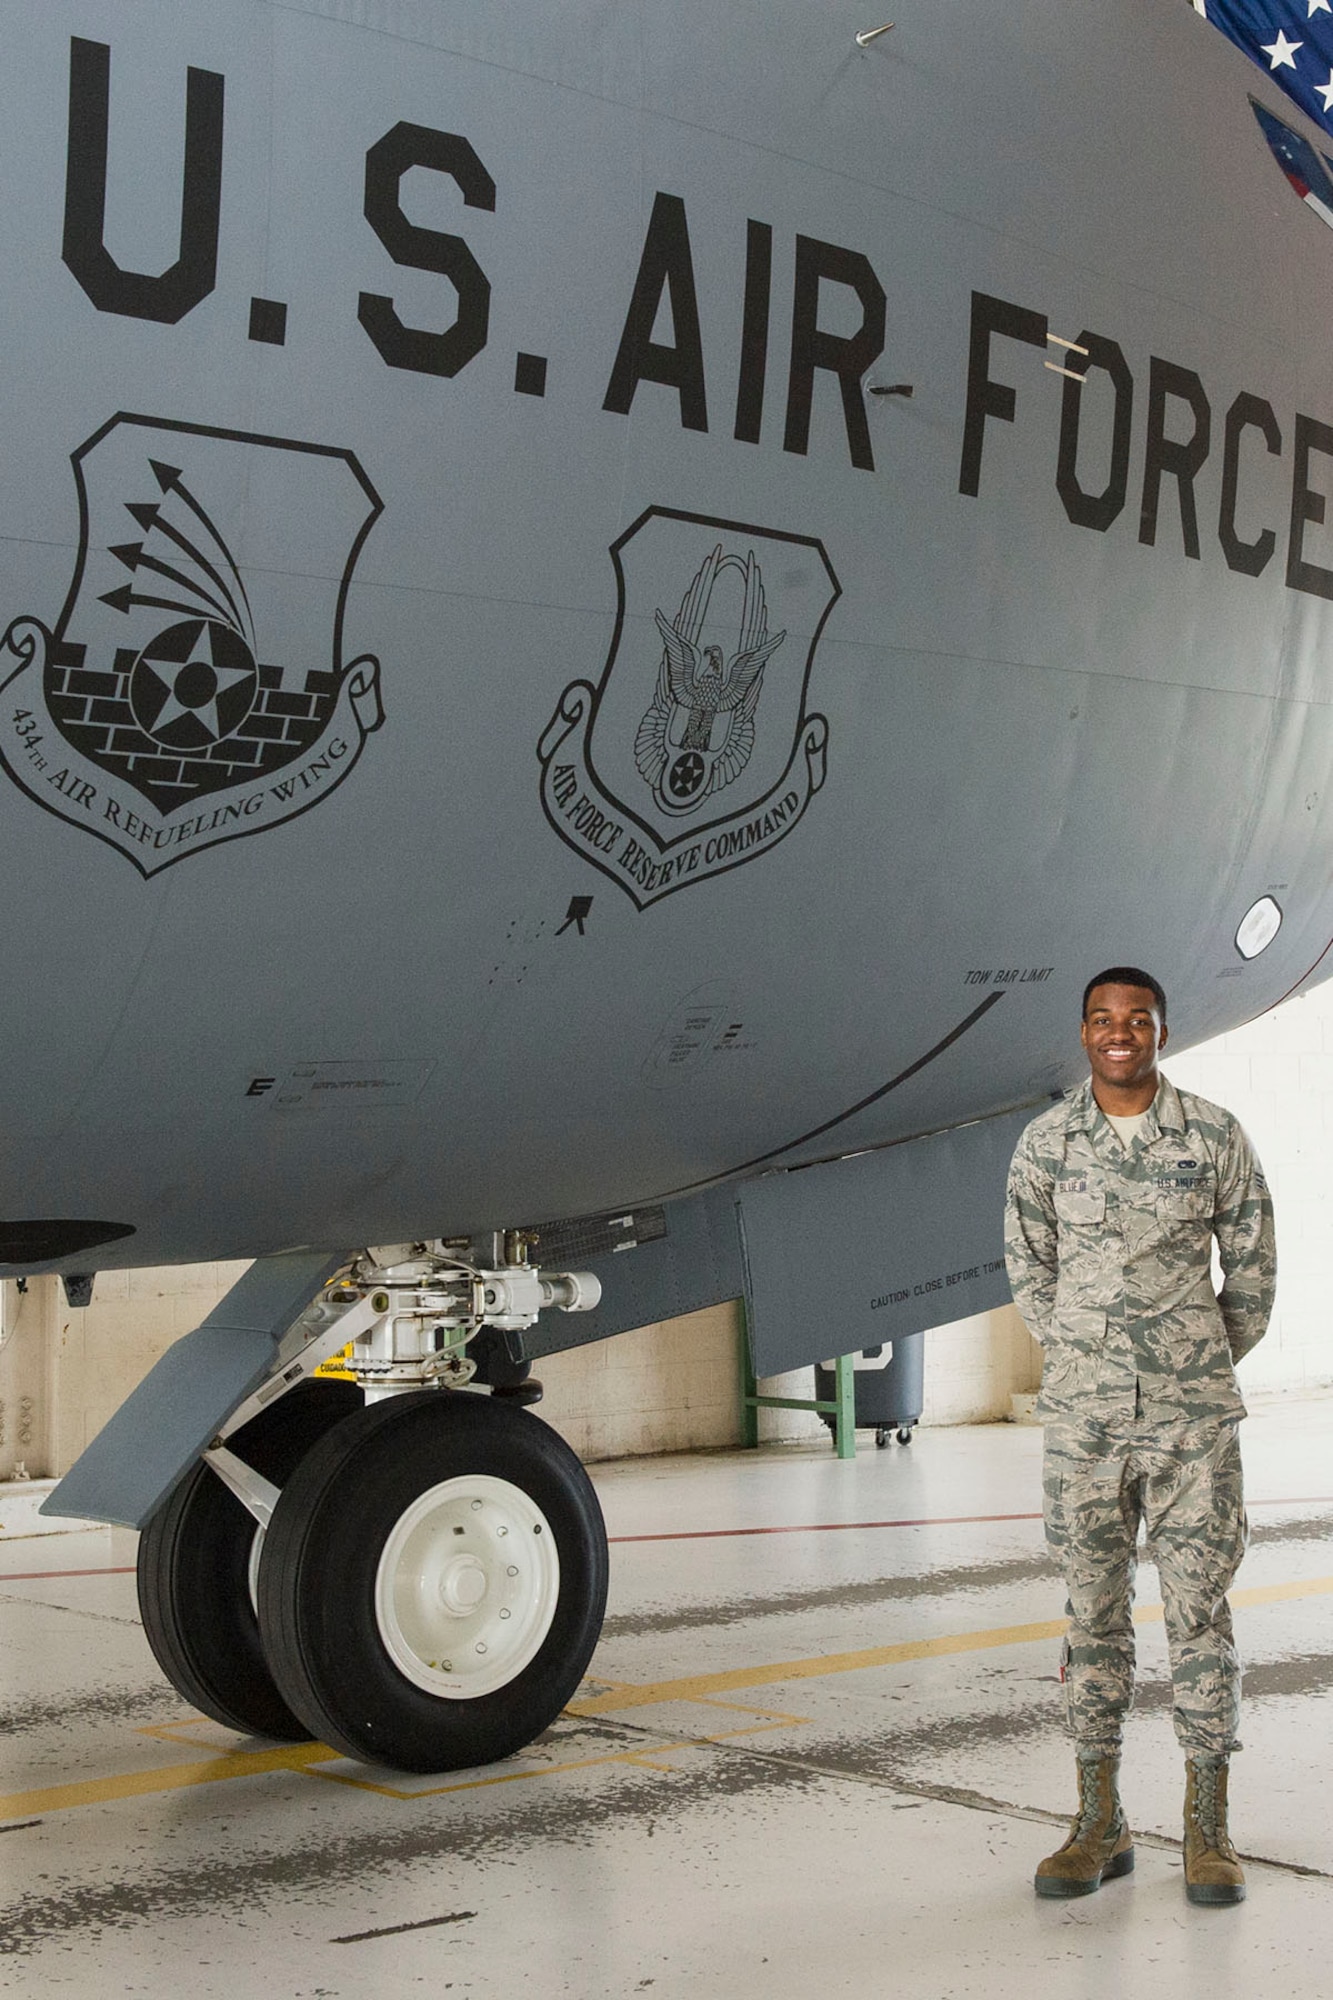 Senior Airman Kenneth Blue III, a 434th aircraft guidance and controls technician, poses for a photo next to a KC-135 Stratotanker at Grissom Air Reserve Base, Ind. June 6, 2019. Blue was recently accepted in the United States Air Force Academy and will undergo a rigorous academic and military training program before commissioning as an officer. 
(U.S. Air Force photo/ Staff Sgt. Courtney Dotson-Essett)